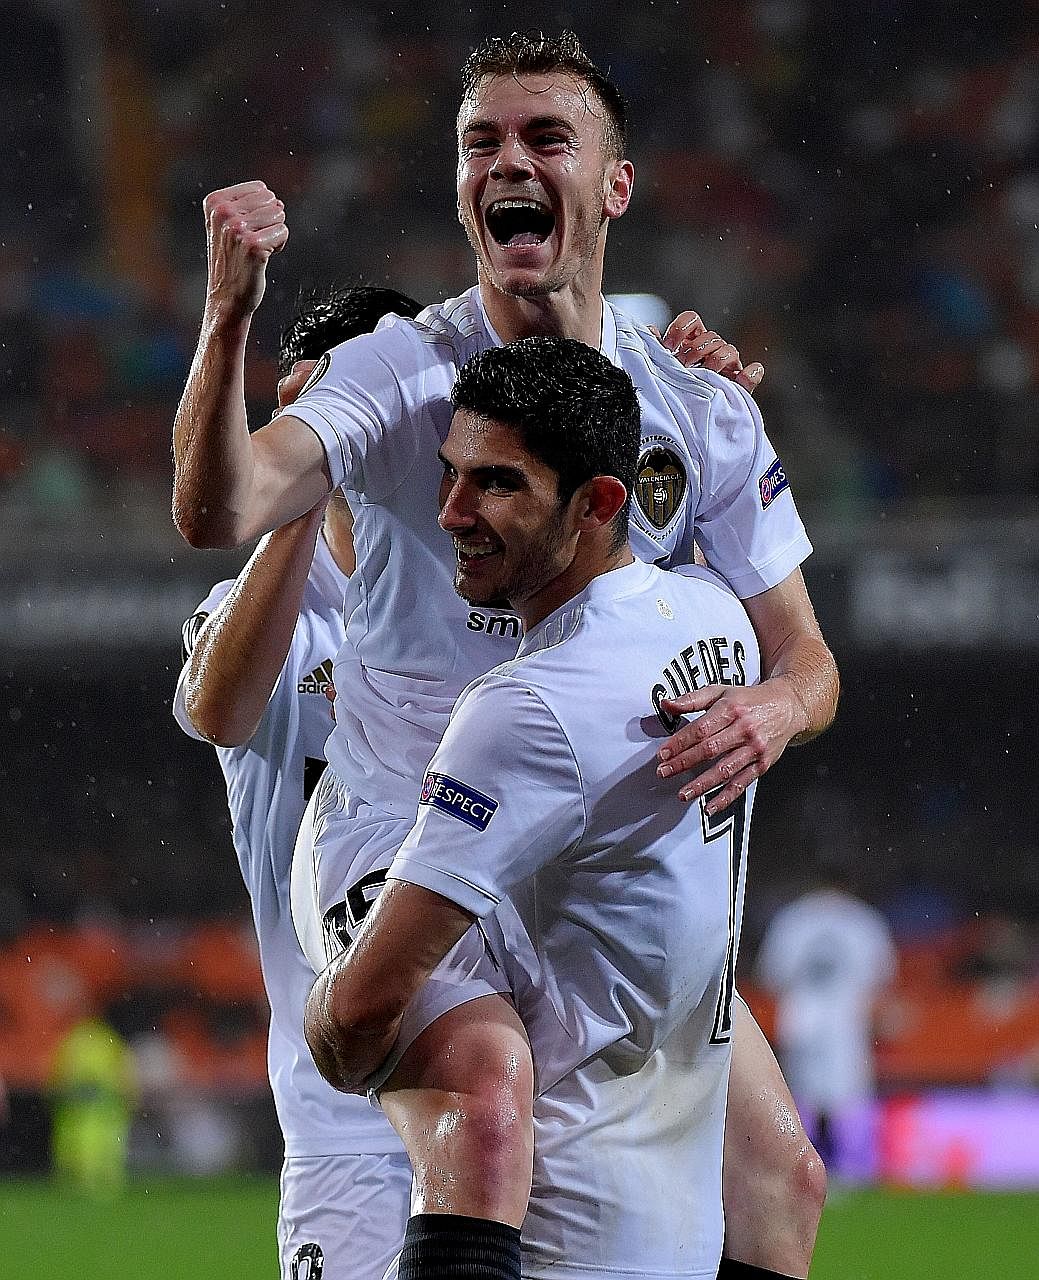 Valencia's Spanish defender Toni Lato celebrating with Portuguese midfielder Goncalo Guedes after putting them in the lead against Villarreal in the Europa League quarter-final second leg at the Mestalla.